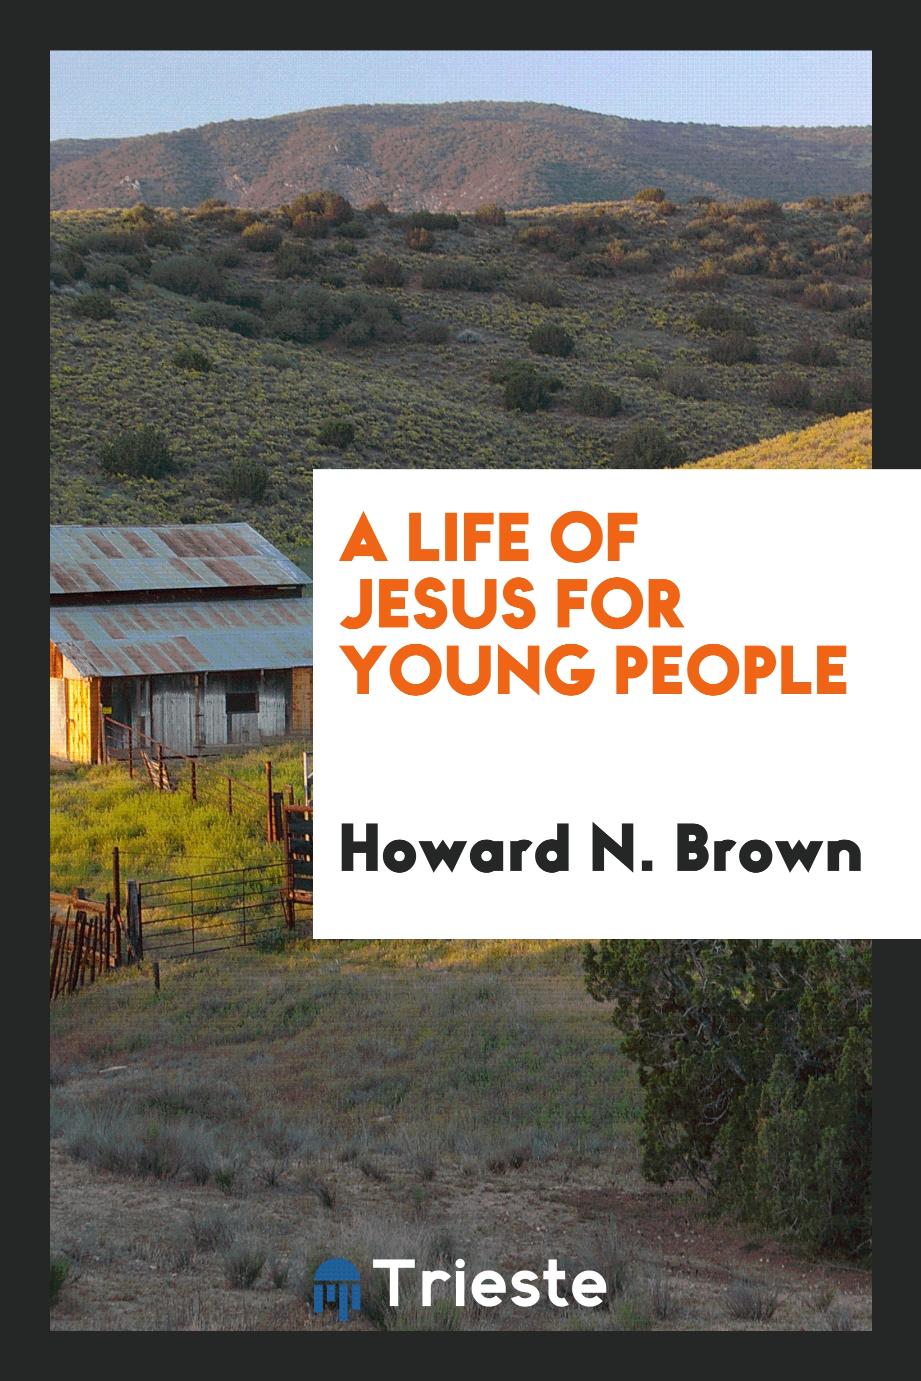 A Life of Jesus for Young People